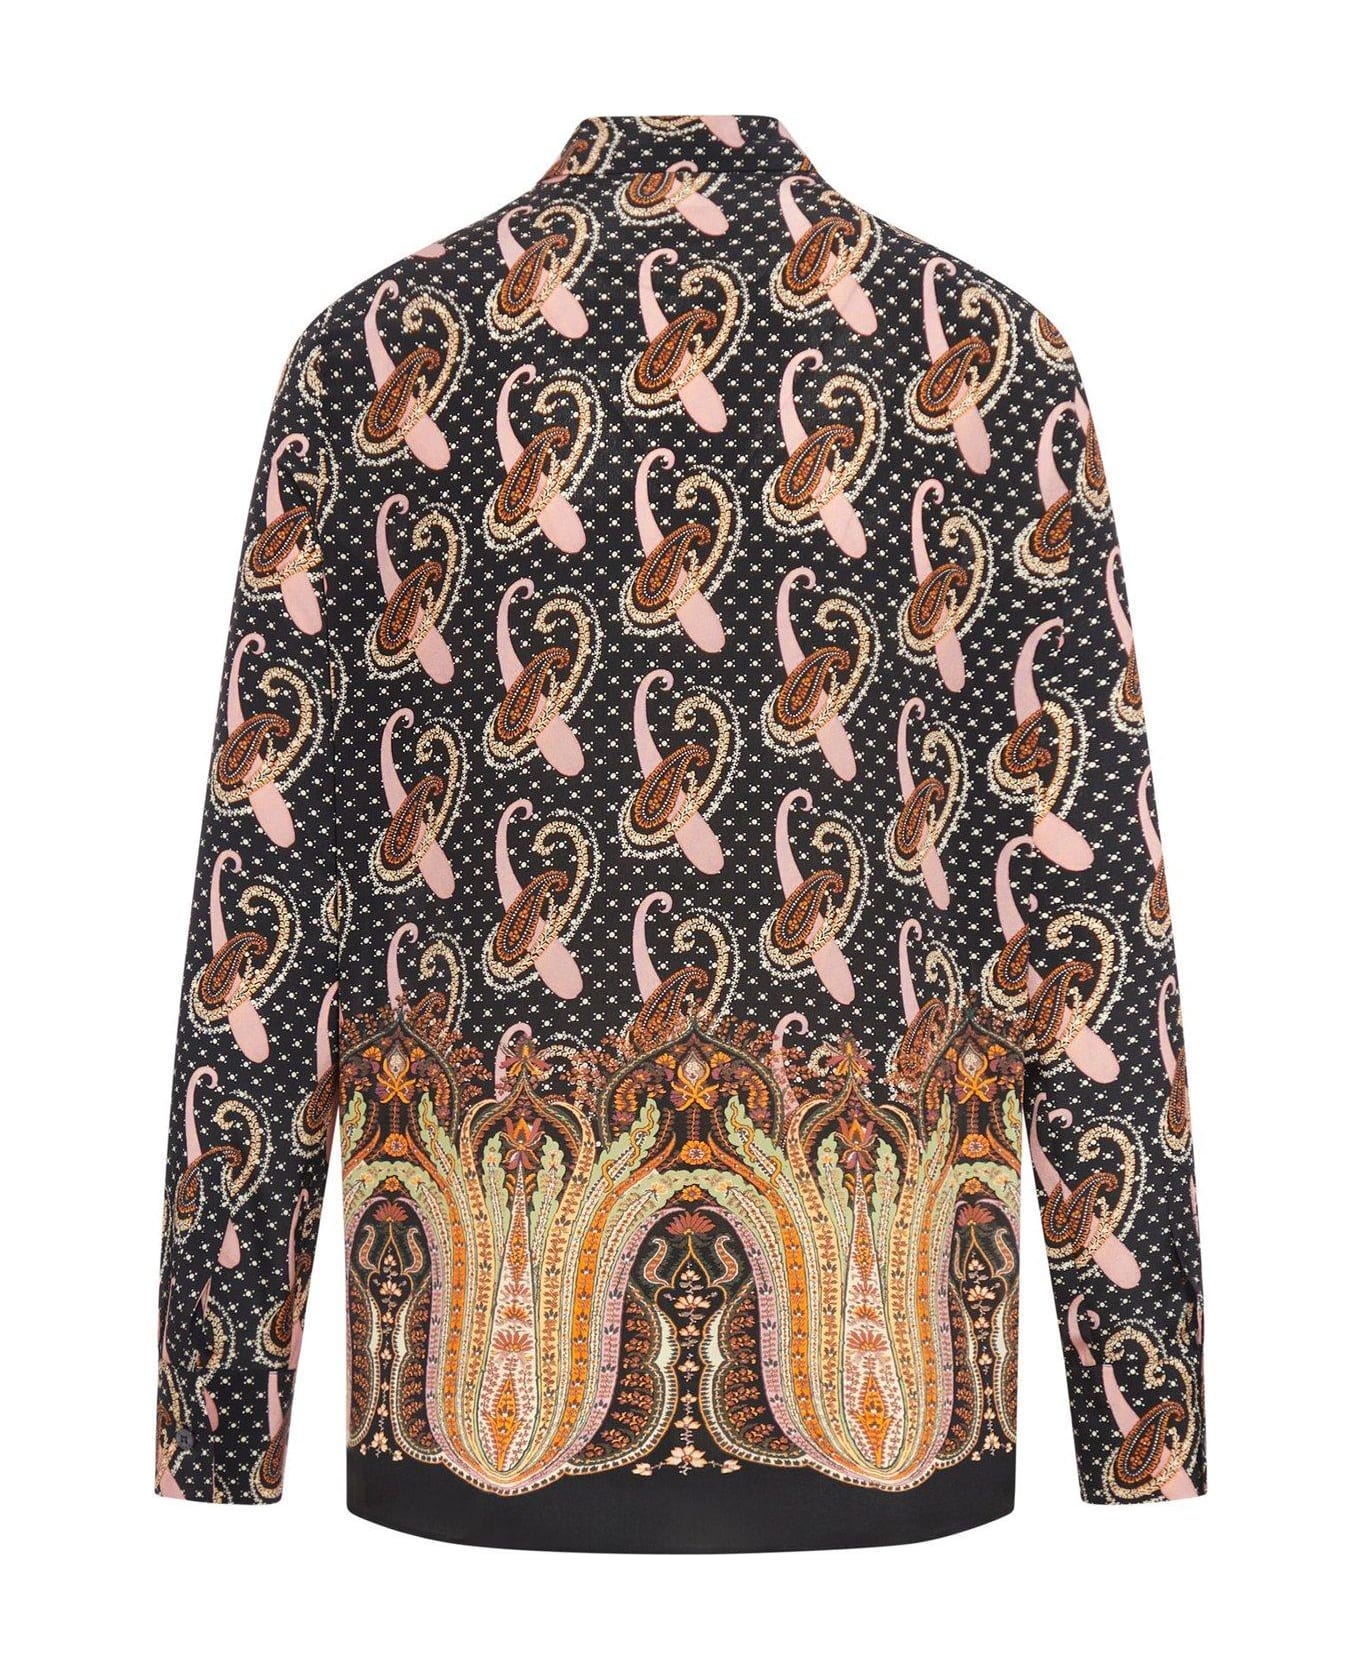 Etro All-over Patterned Long-sleeved Shirt - Nero